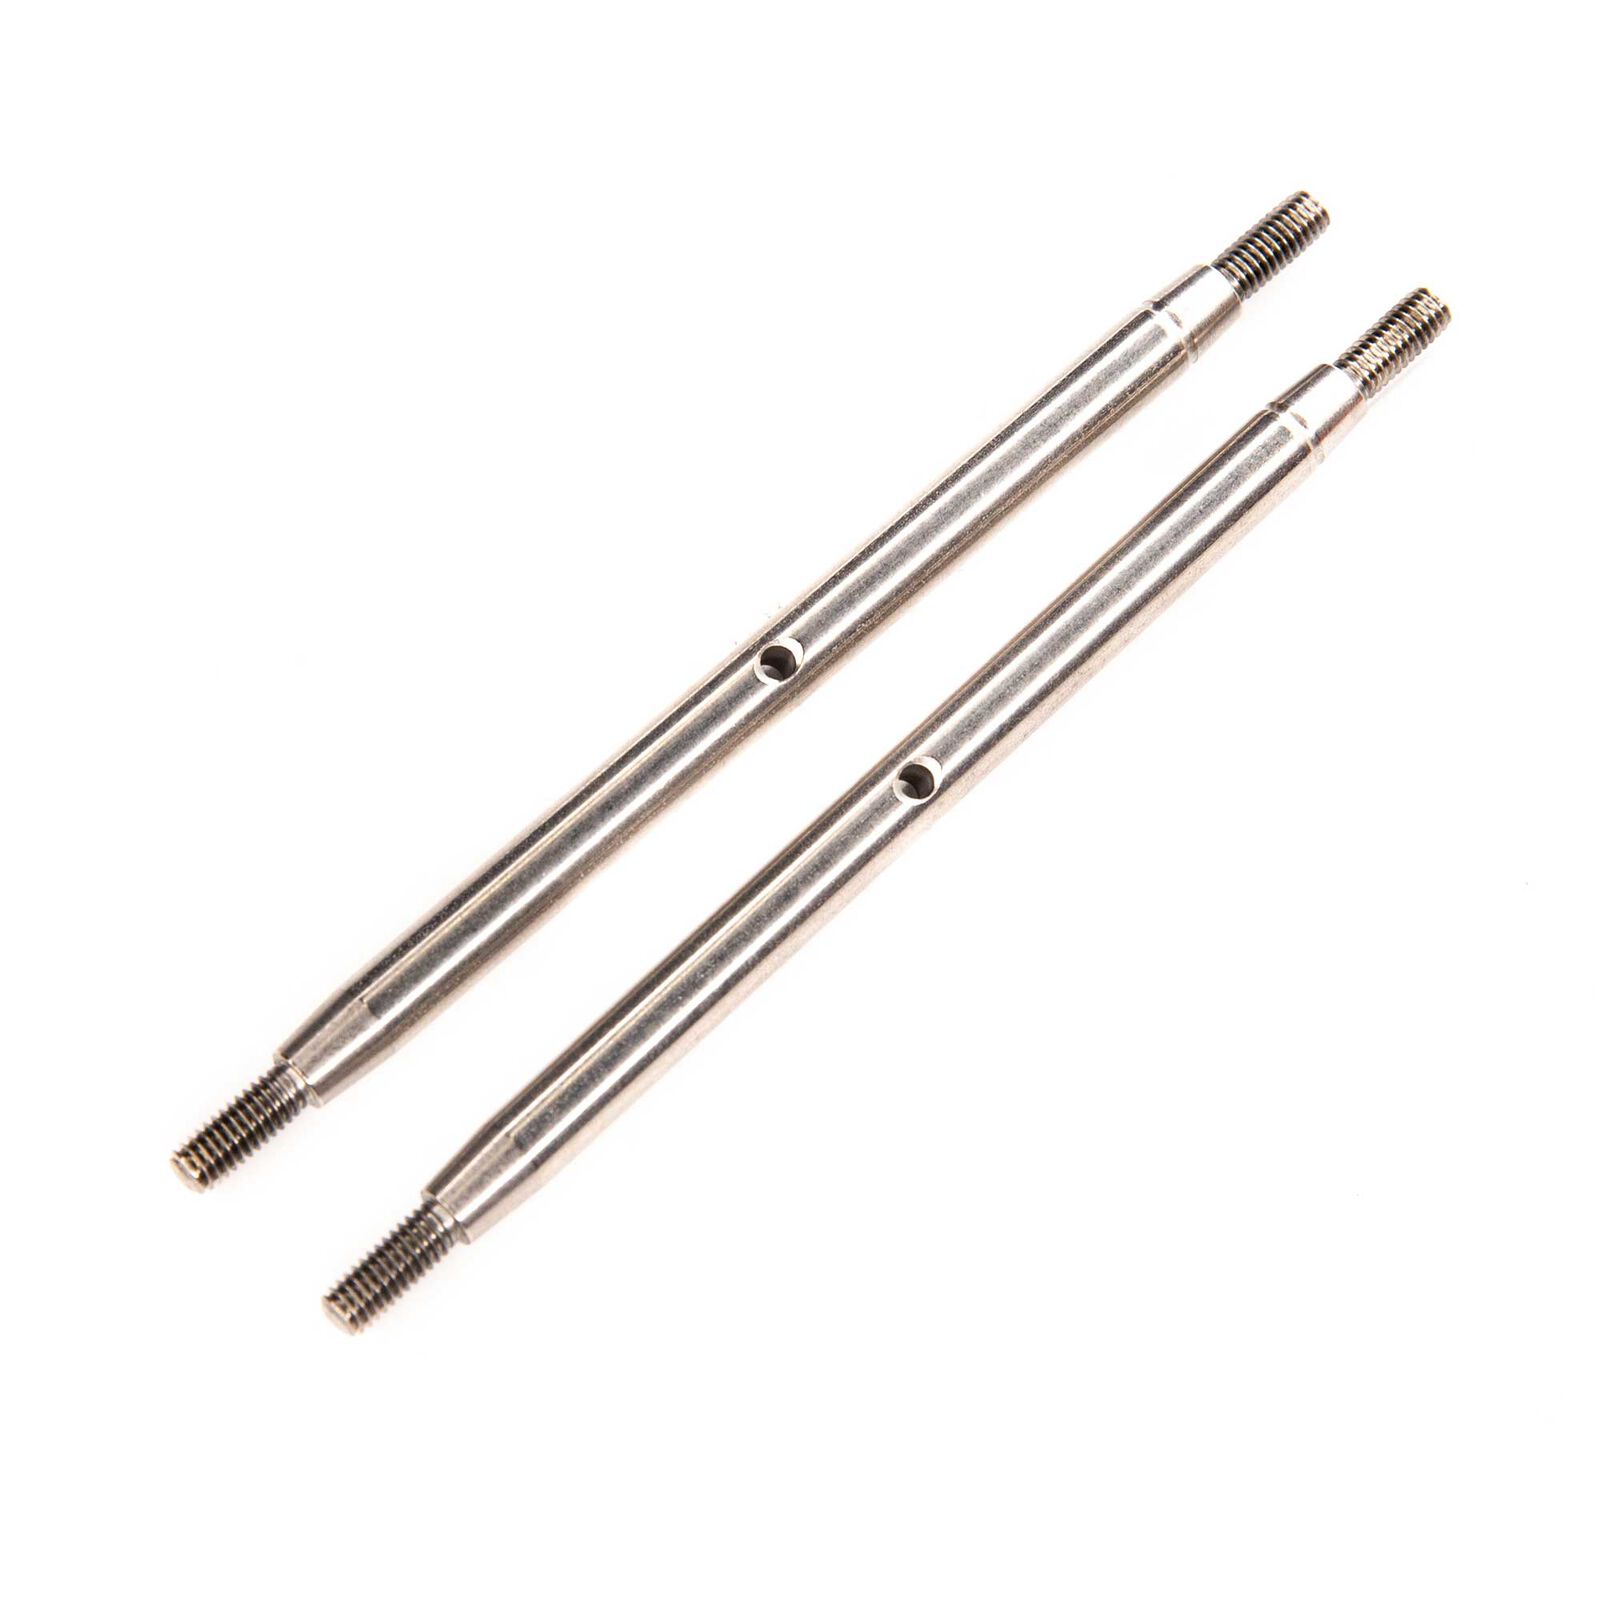 AXIAL Stainless Steel M6x 109mm Link (2pcs): SCX10III